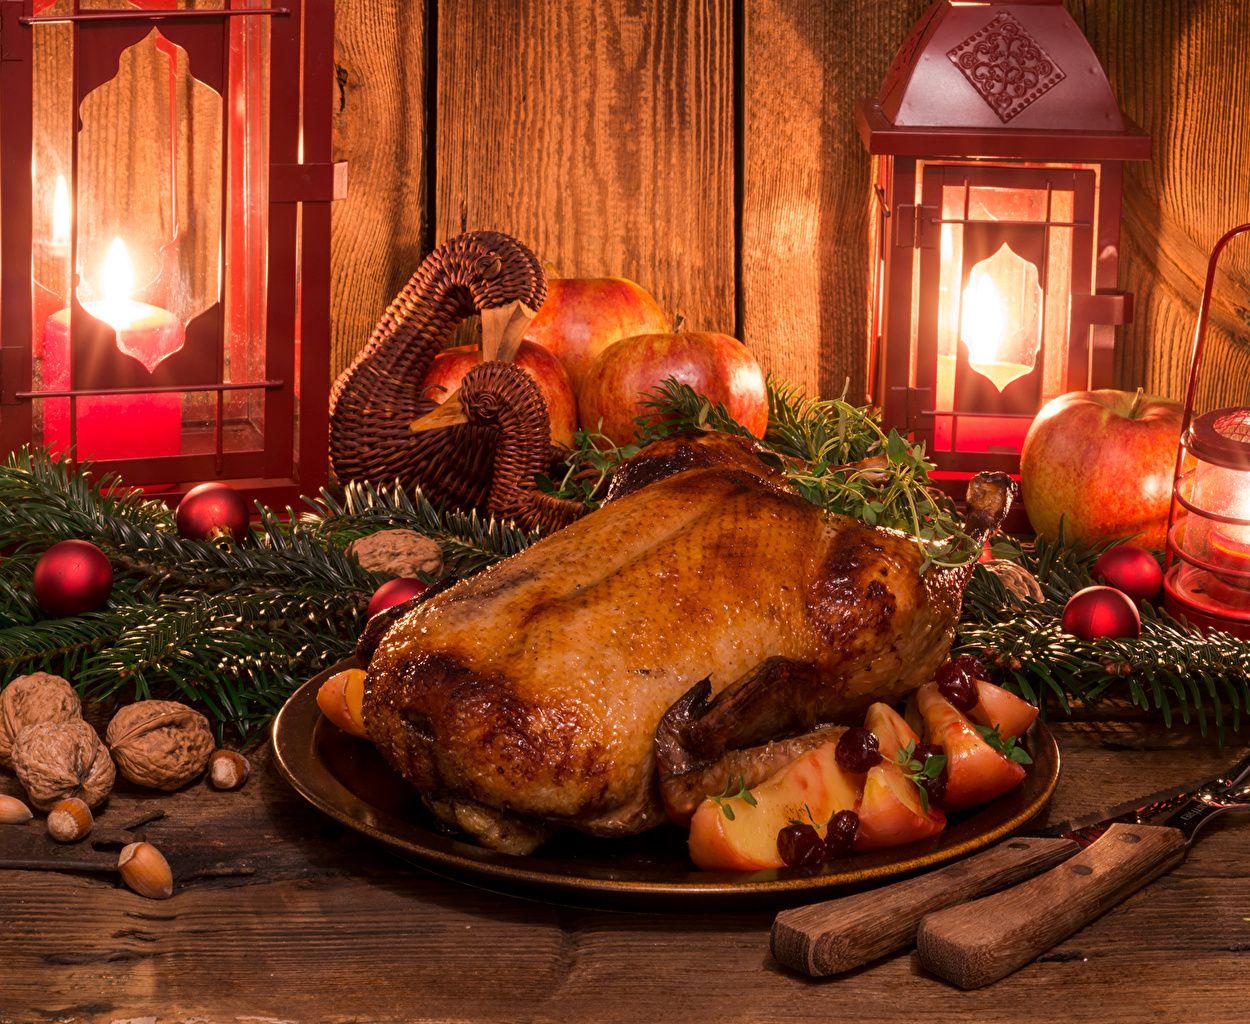 Wallpaper New year Apples Roast Chicken Food Candles Nuts Holidays